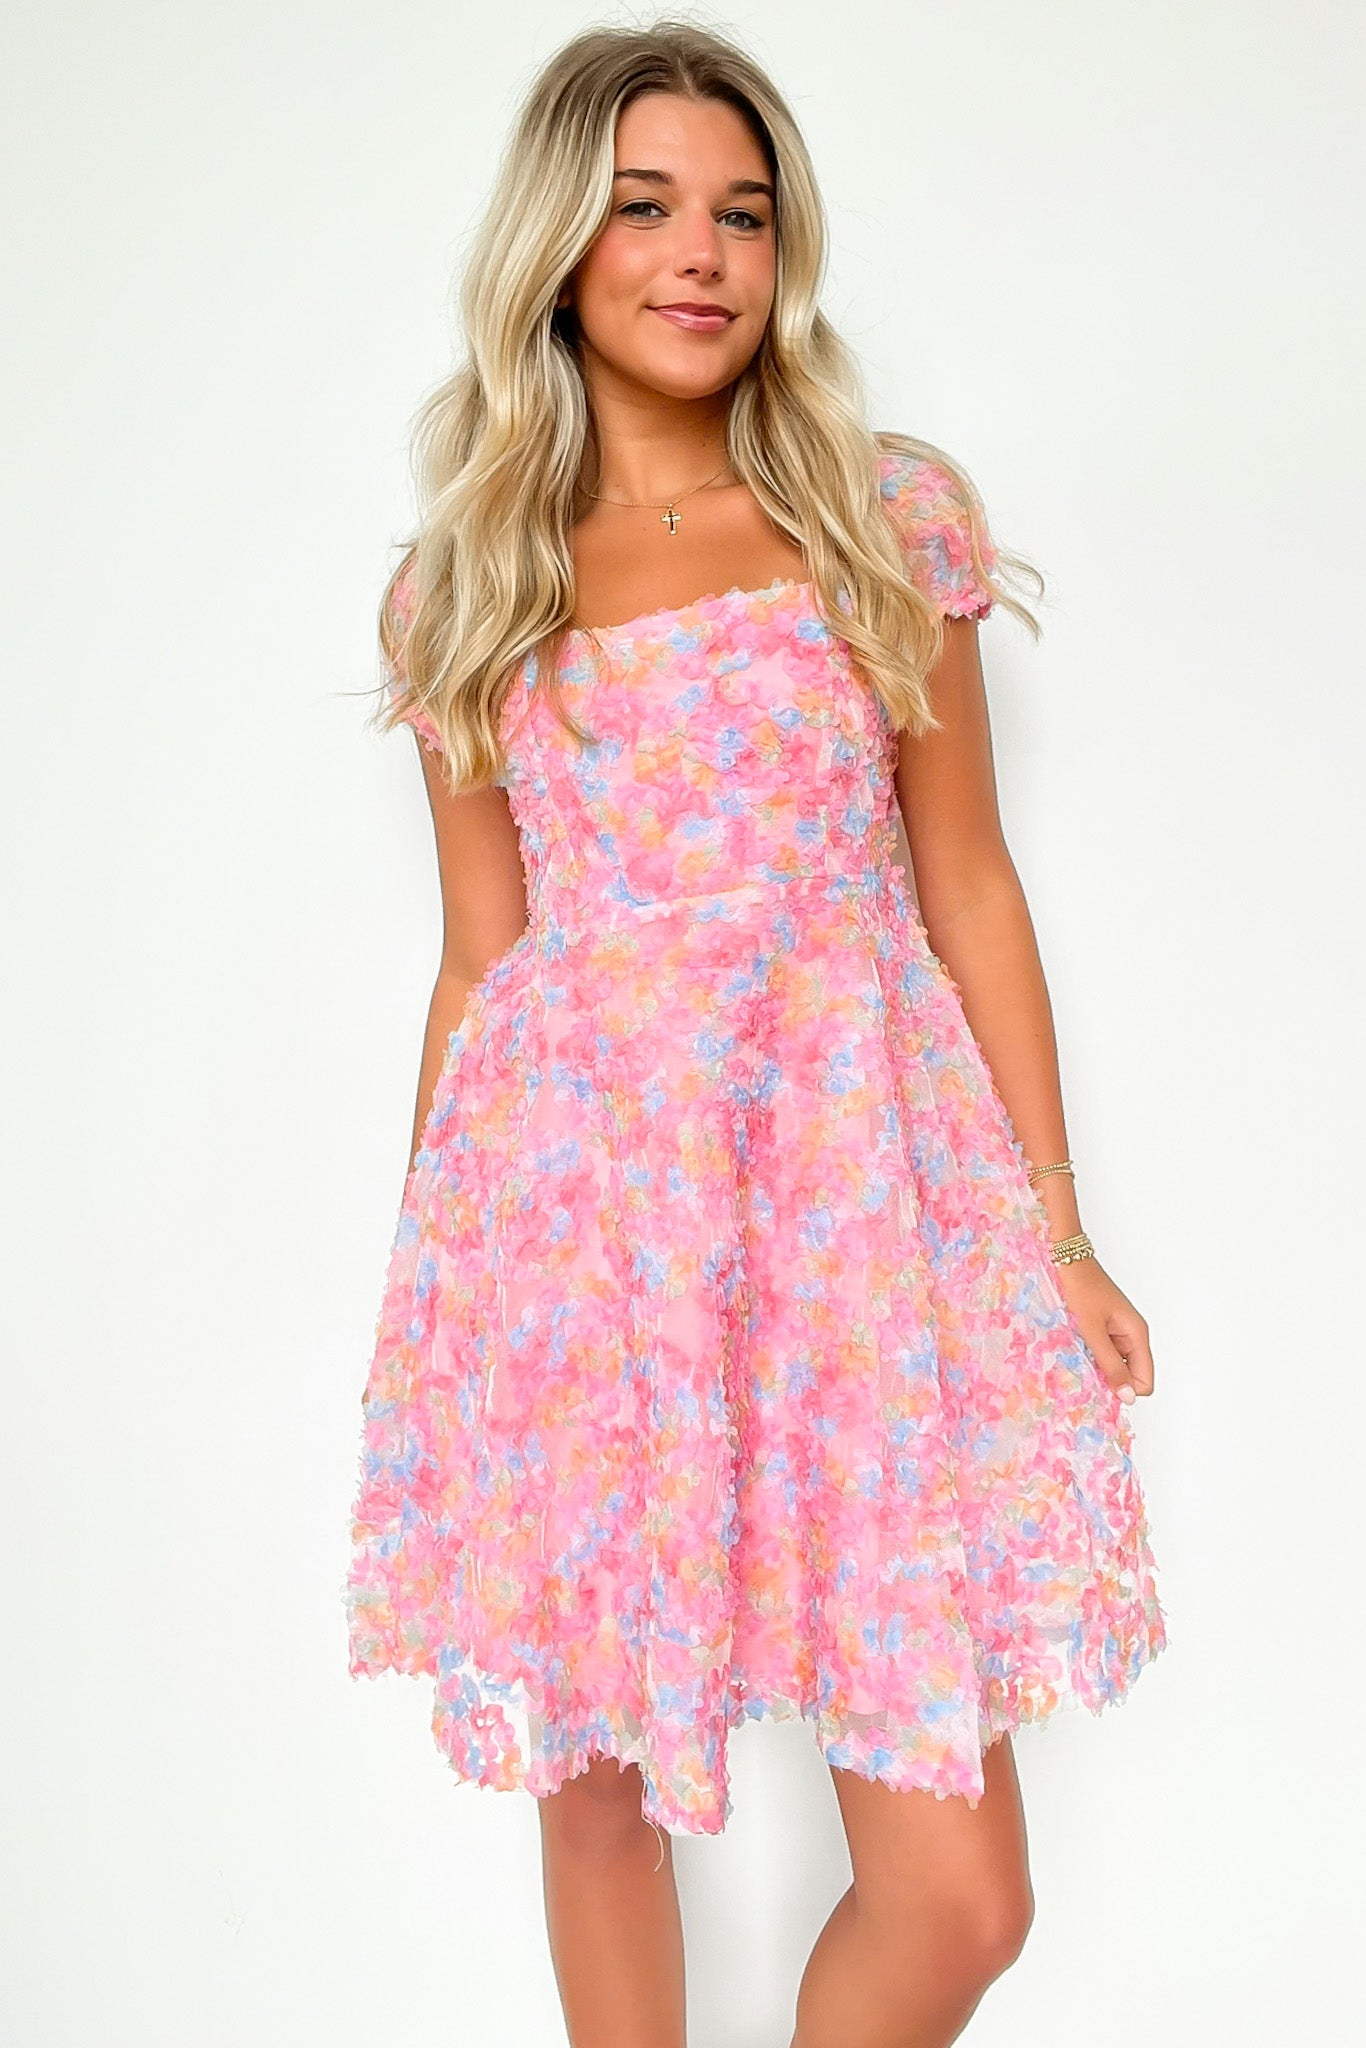  Compelling Charisma Textured Floral Dress - Madison and Mallory